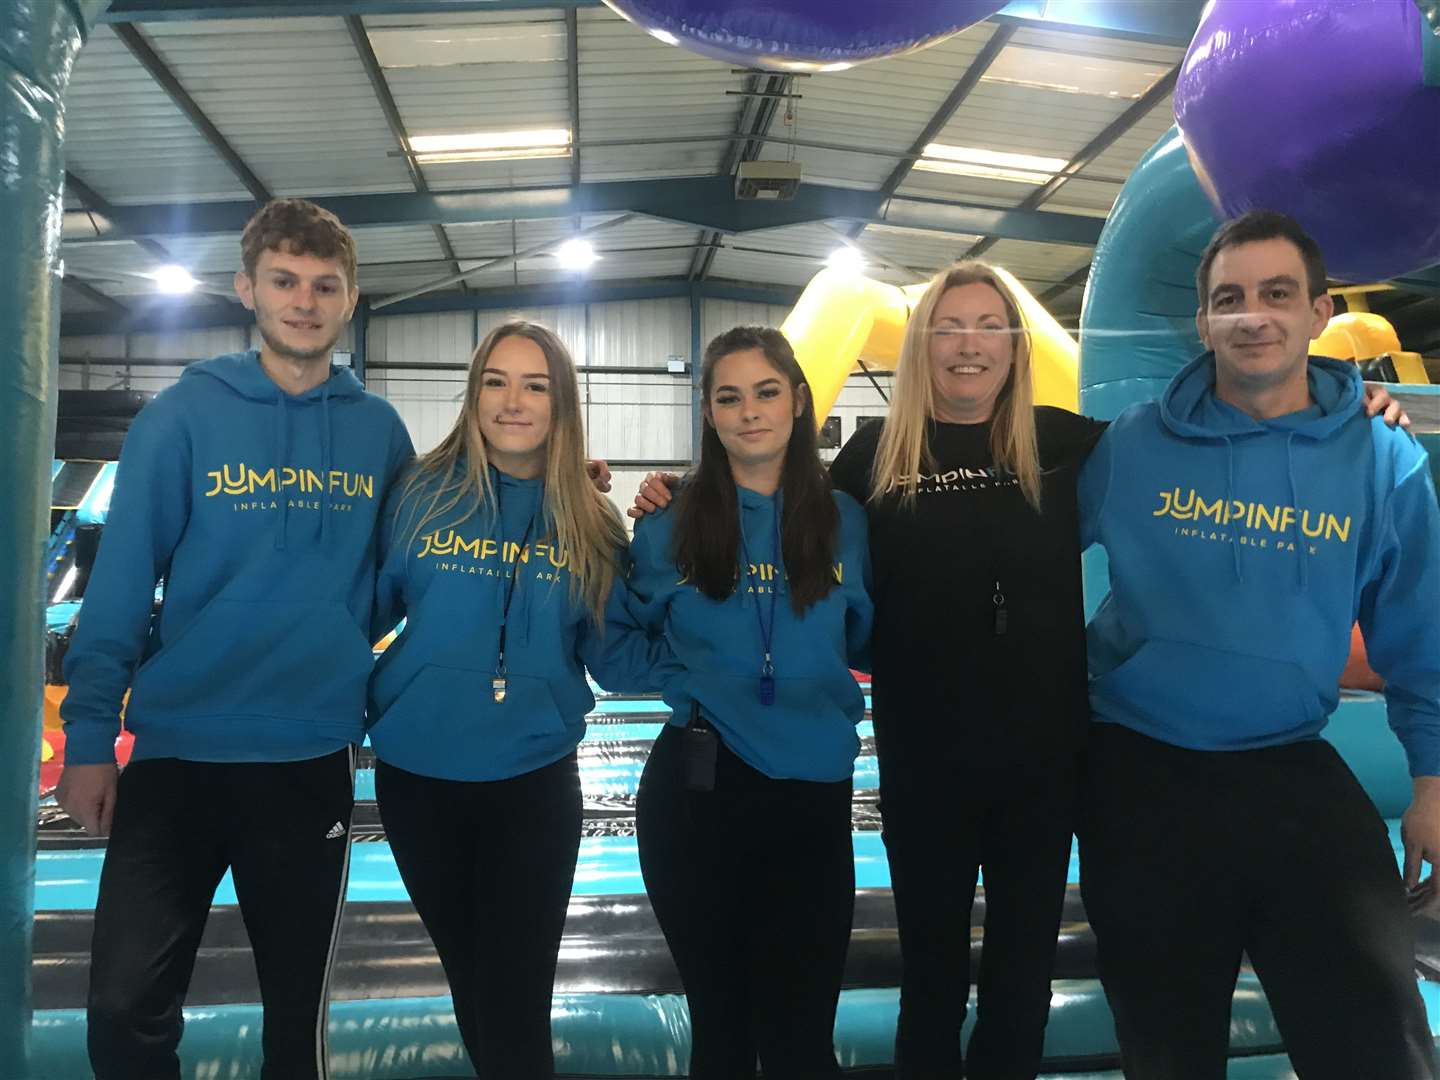 The Jumpin Fun team after their first manic morning at the new Rochester site